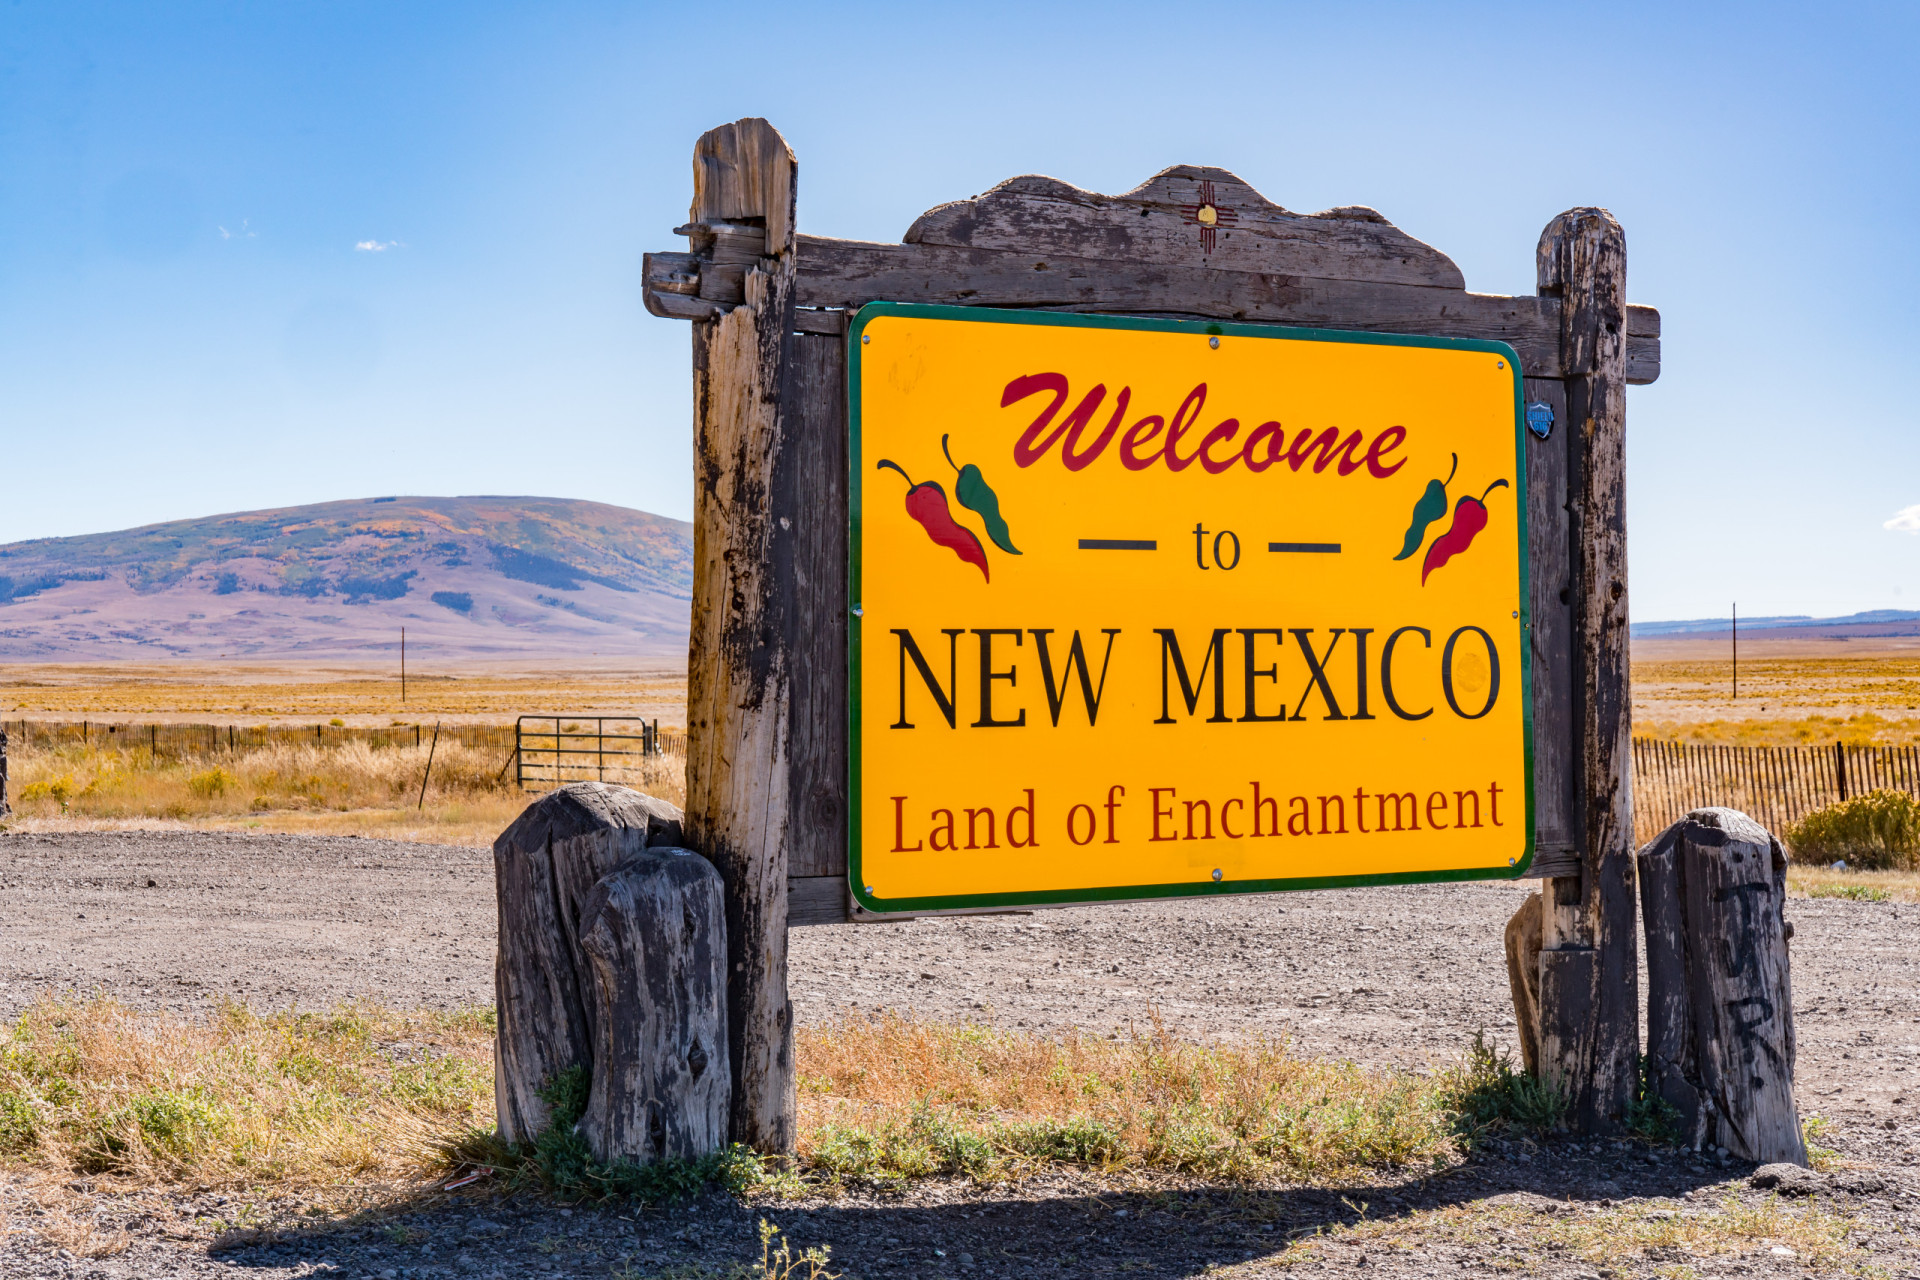 <p>New Mexico's colorful welcome sign makes reference to the state flag colors, as well as its agriculture, illustrated by red and green chilies.</p><p><a href="https://www.msn.com/en-us/community/channel/vid-7xx8mnucu55yw63we9va2gwr7uihbxwc68fxqp25x6tg4ftibpra?cvid=94631541bc0f4f89bfd59158d696ad7e">Follow us and access great exclusive content every day</a></p>